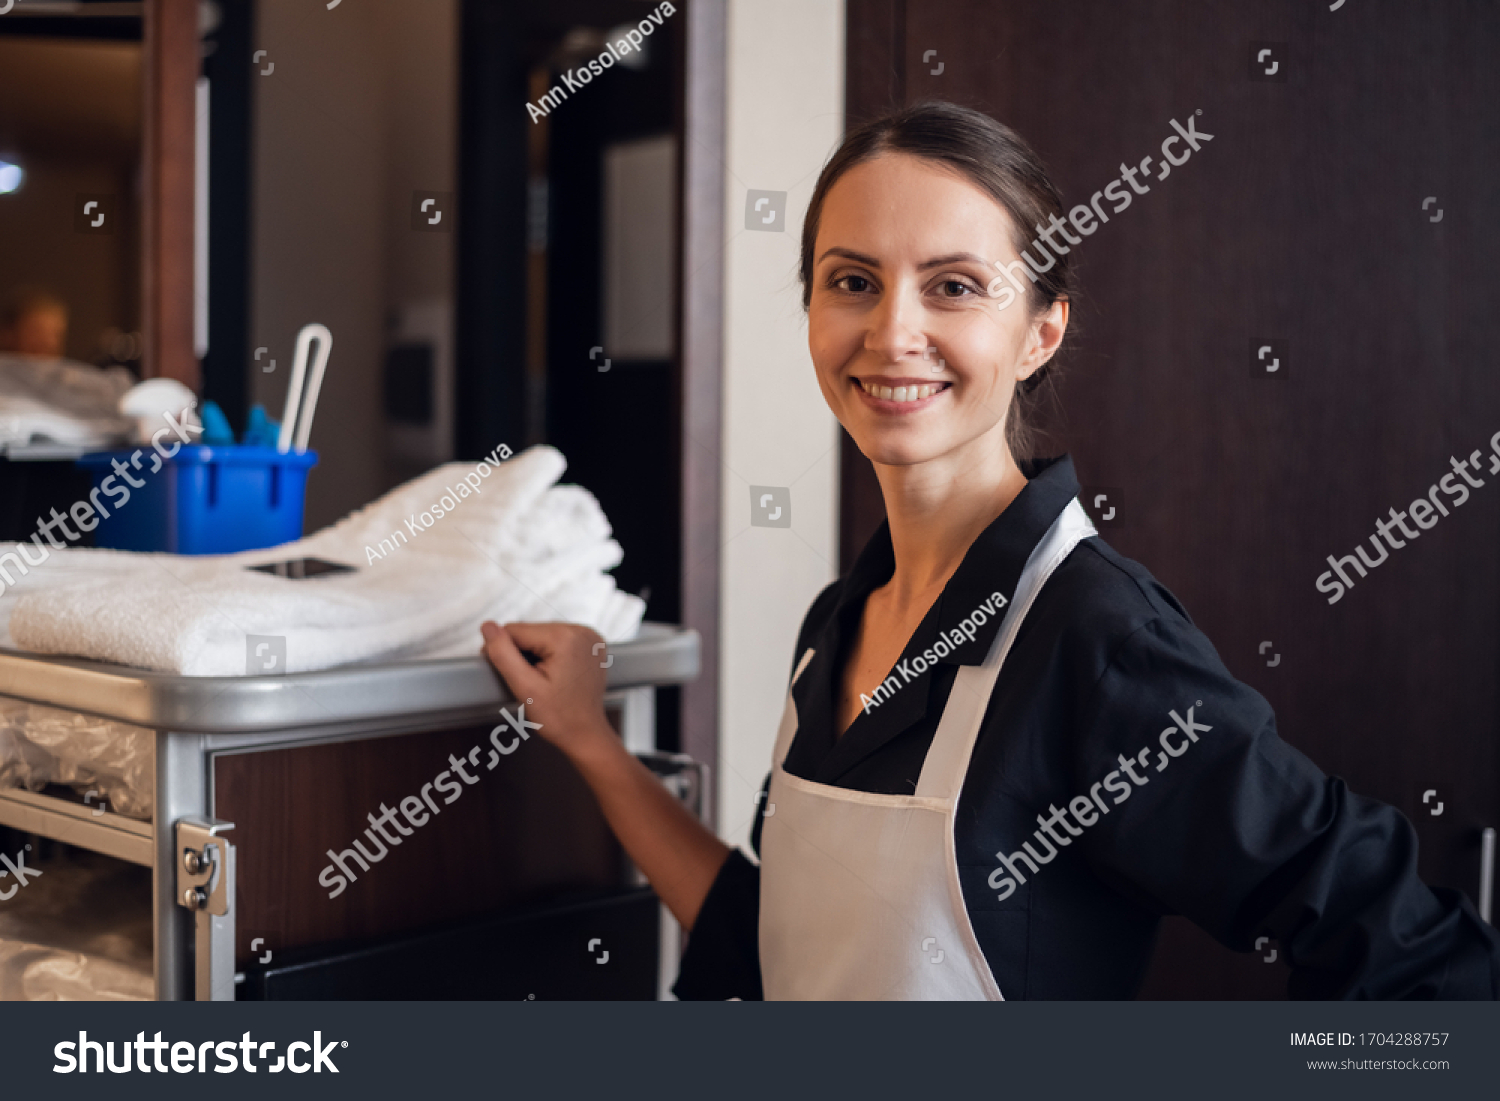 A portrait of a smiling housekeeping lady with a cart #1704288757